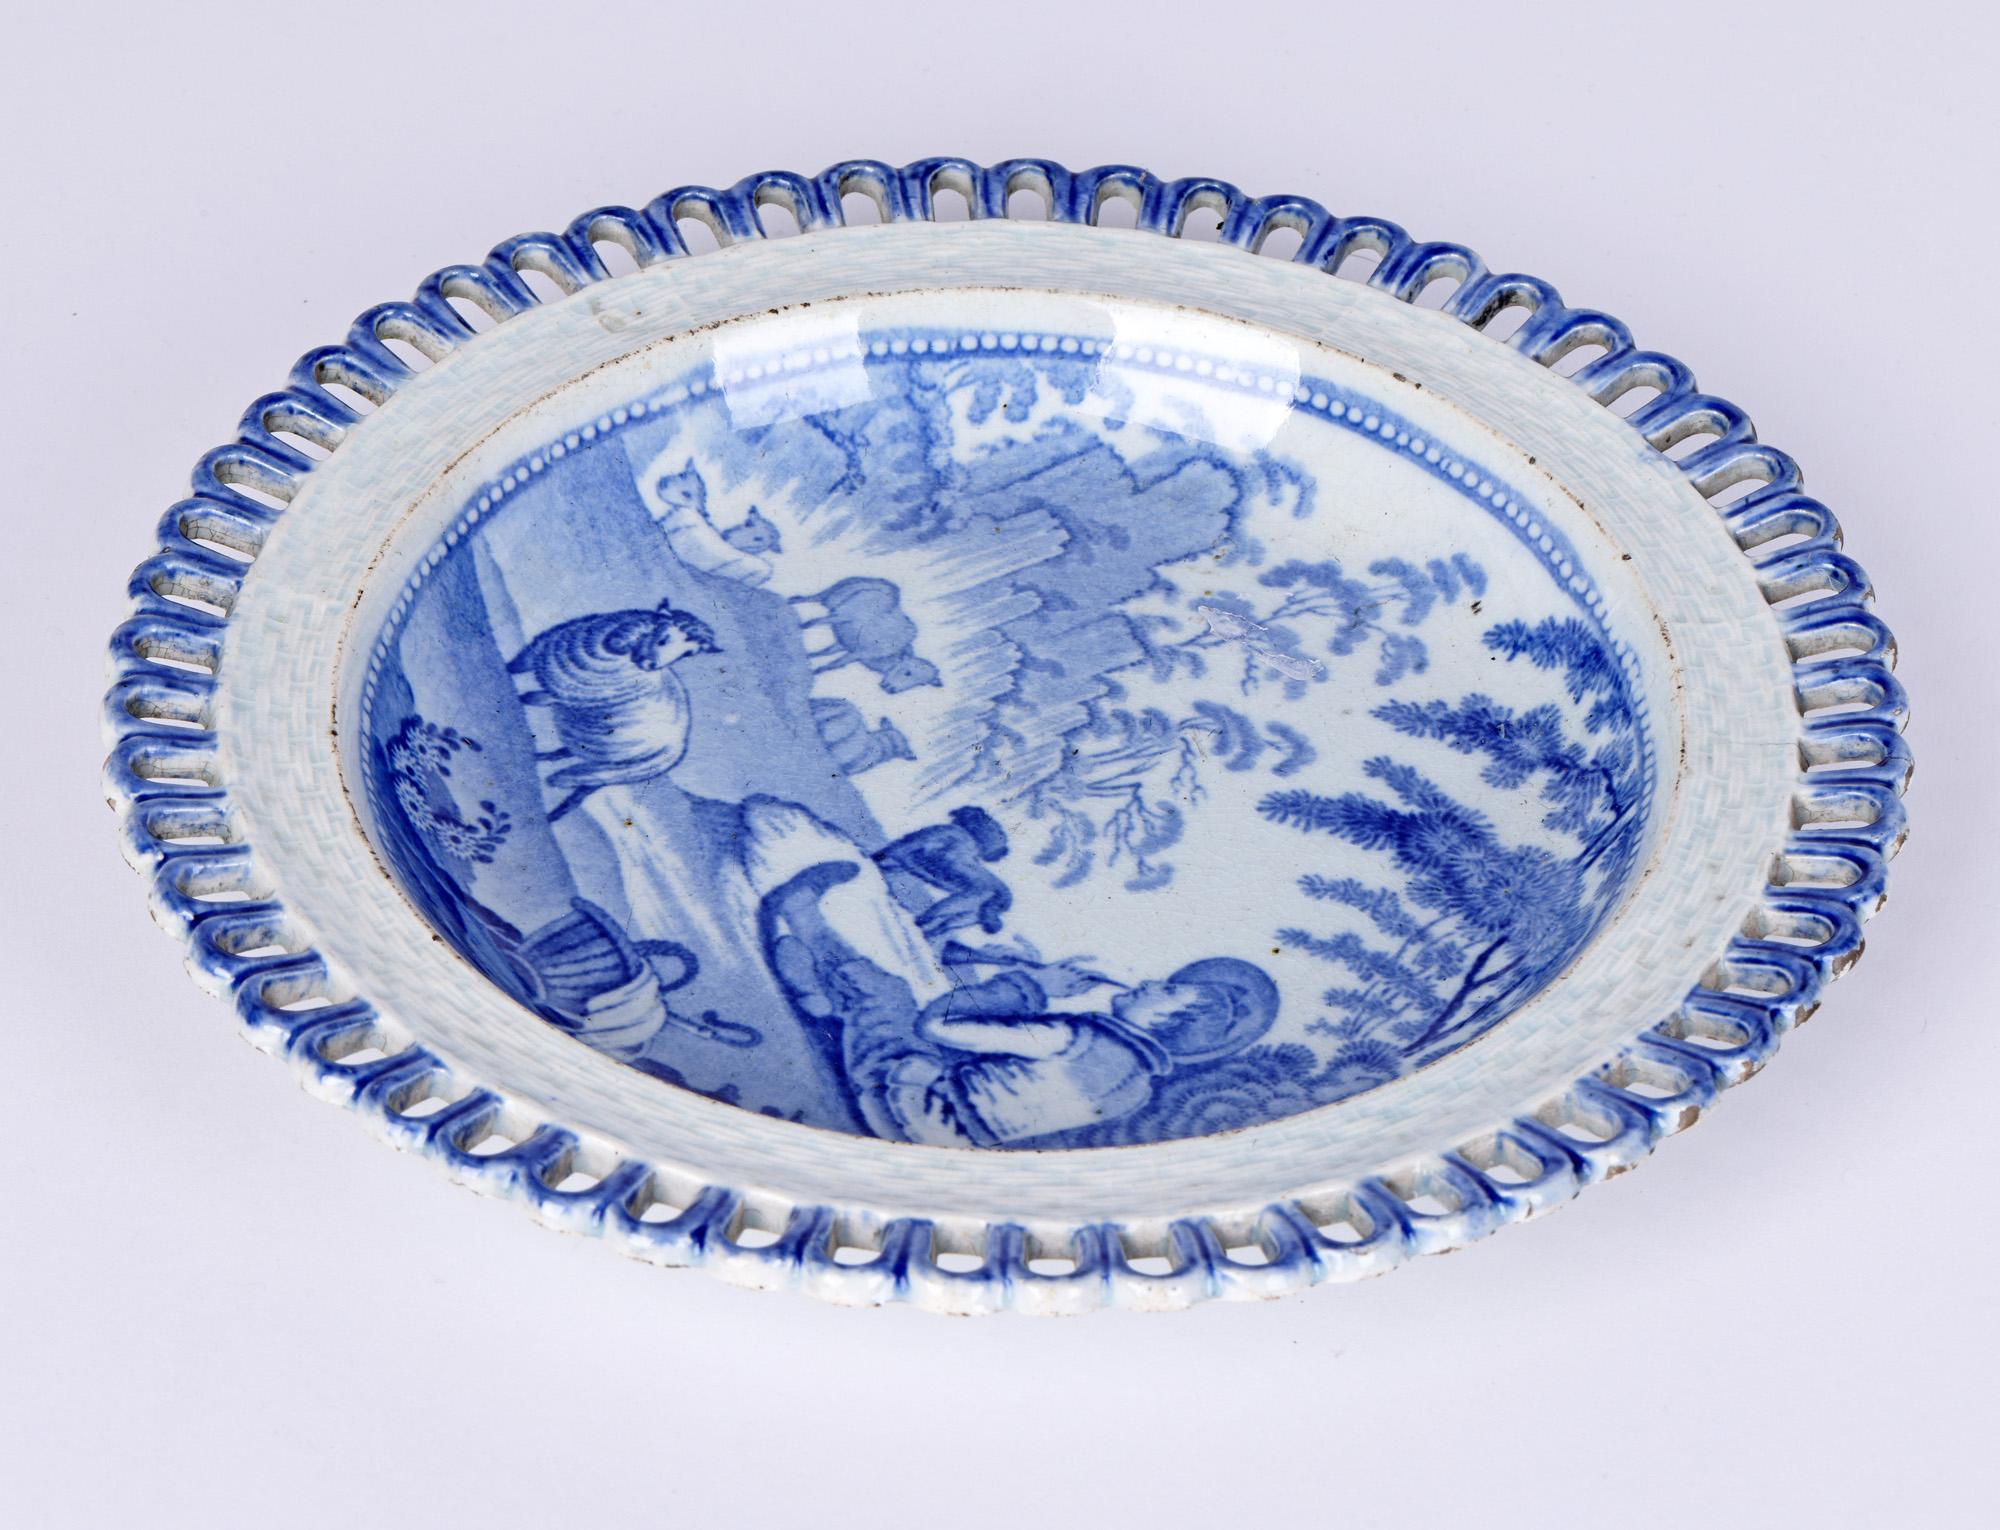 Glazed Antique Staffordshire Pearlware Shepherd & Sheep Ribbon Plate For Sale